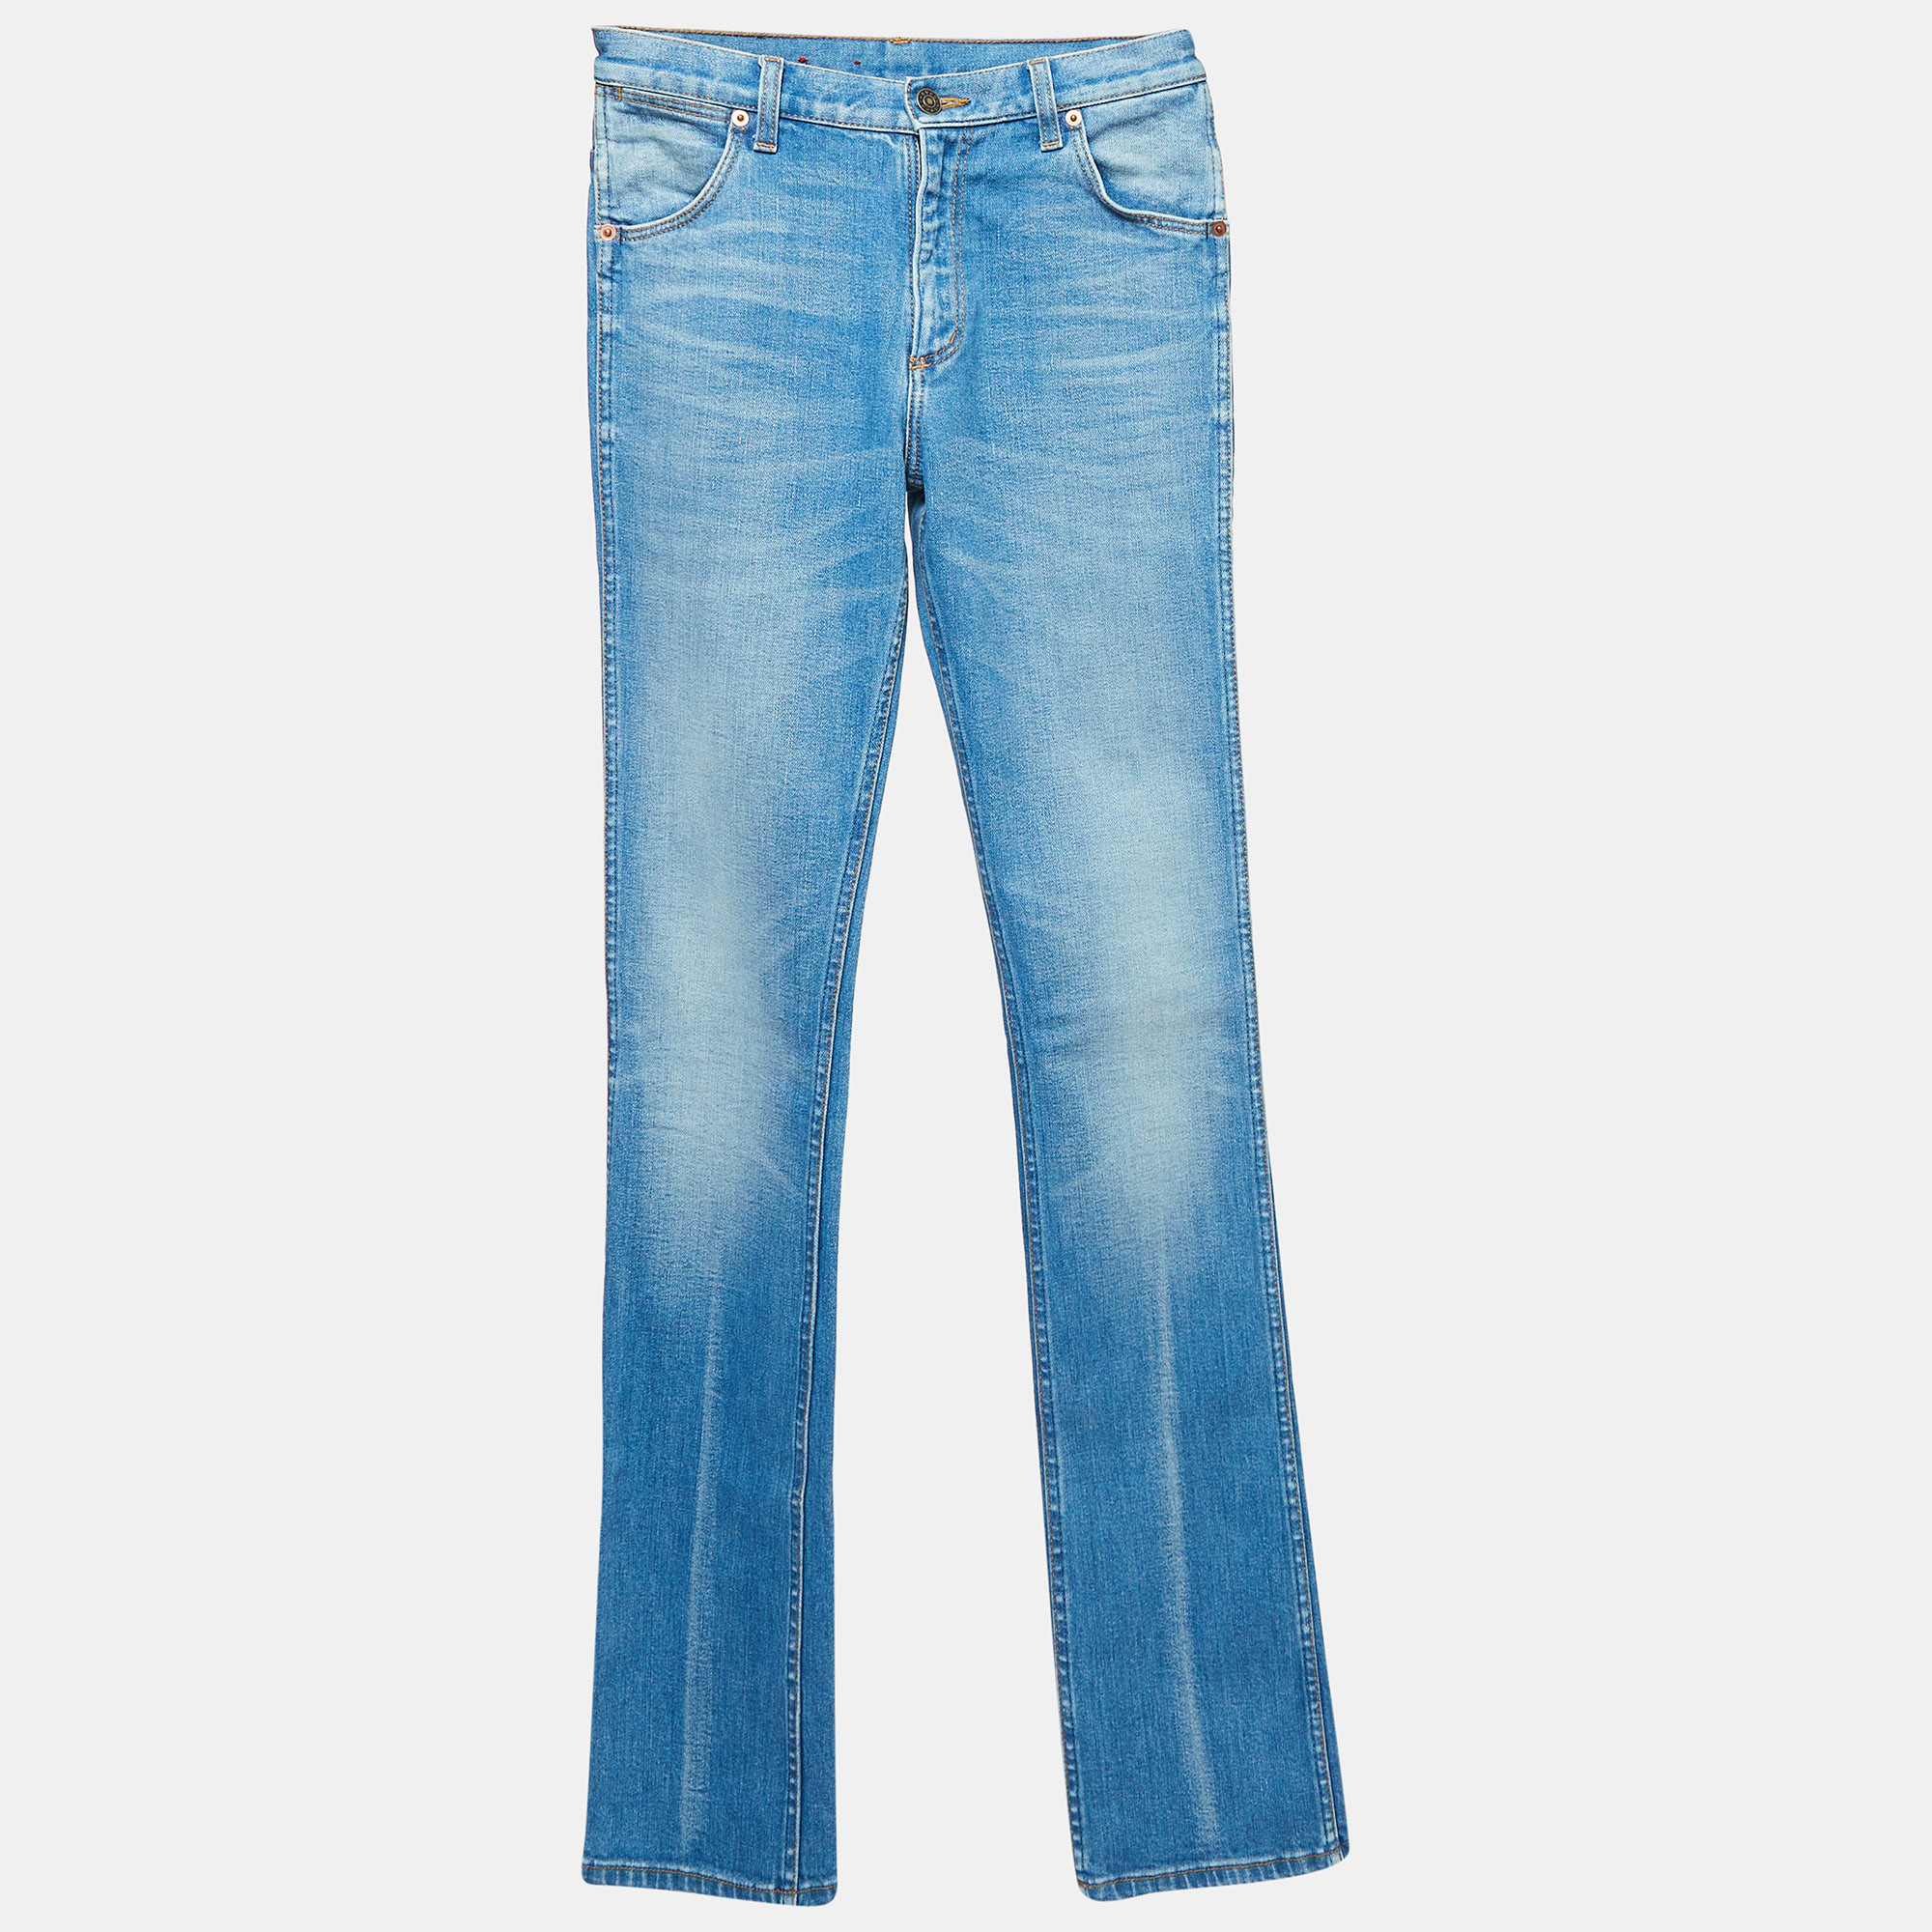 

Gucci Blue Washed Denim High-Rise Jeans S Waist 26"